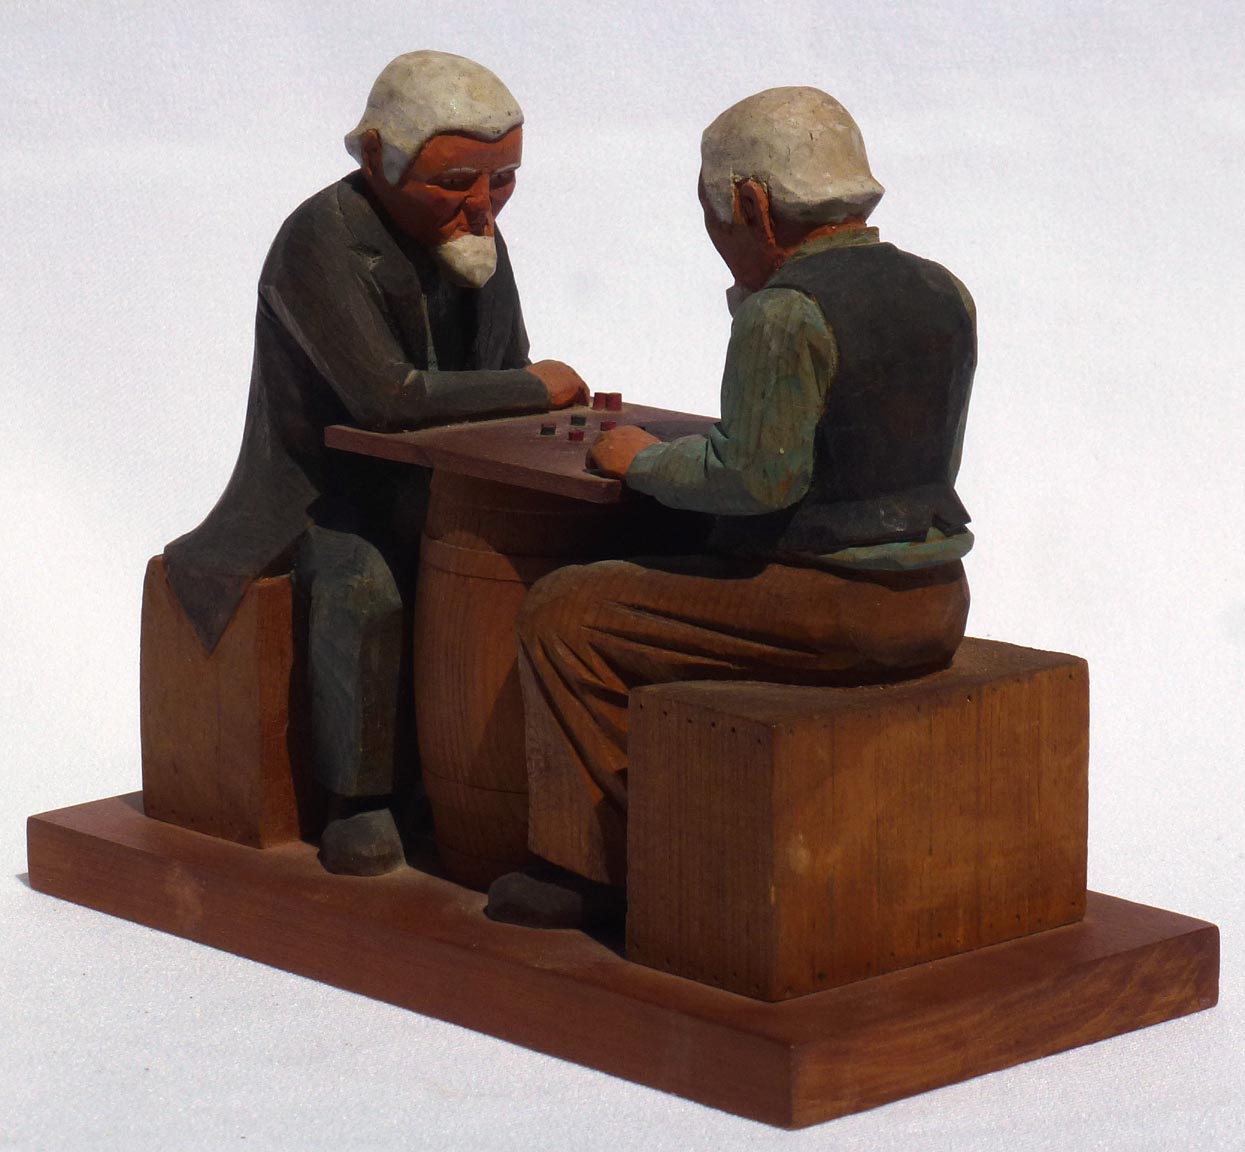 Carving of men playing checkers